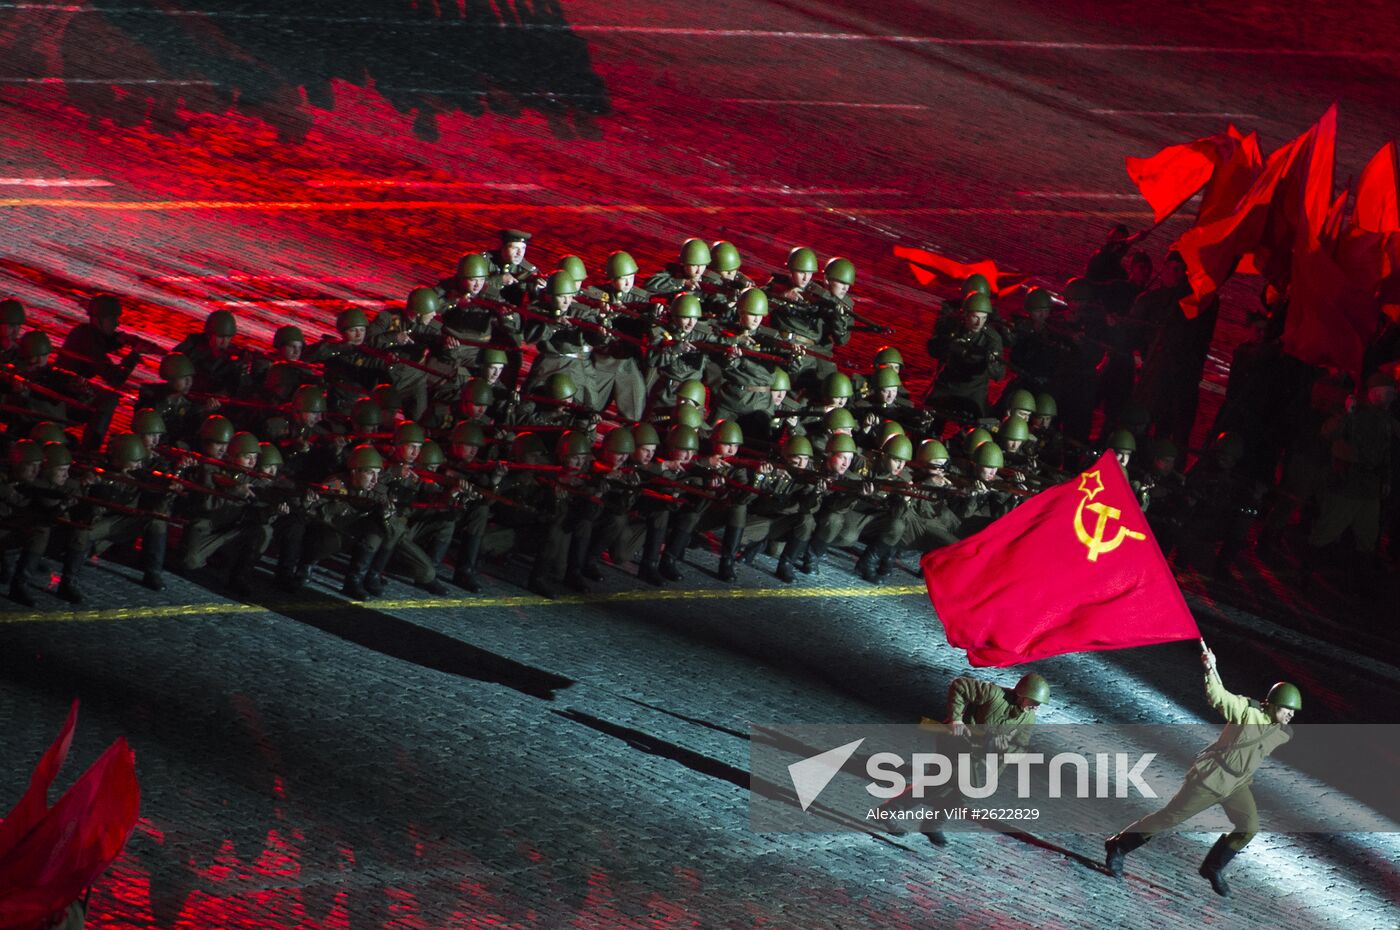 Concert to mark 70th anniversary of Victory in 1941-1945 Great Patriotic War